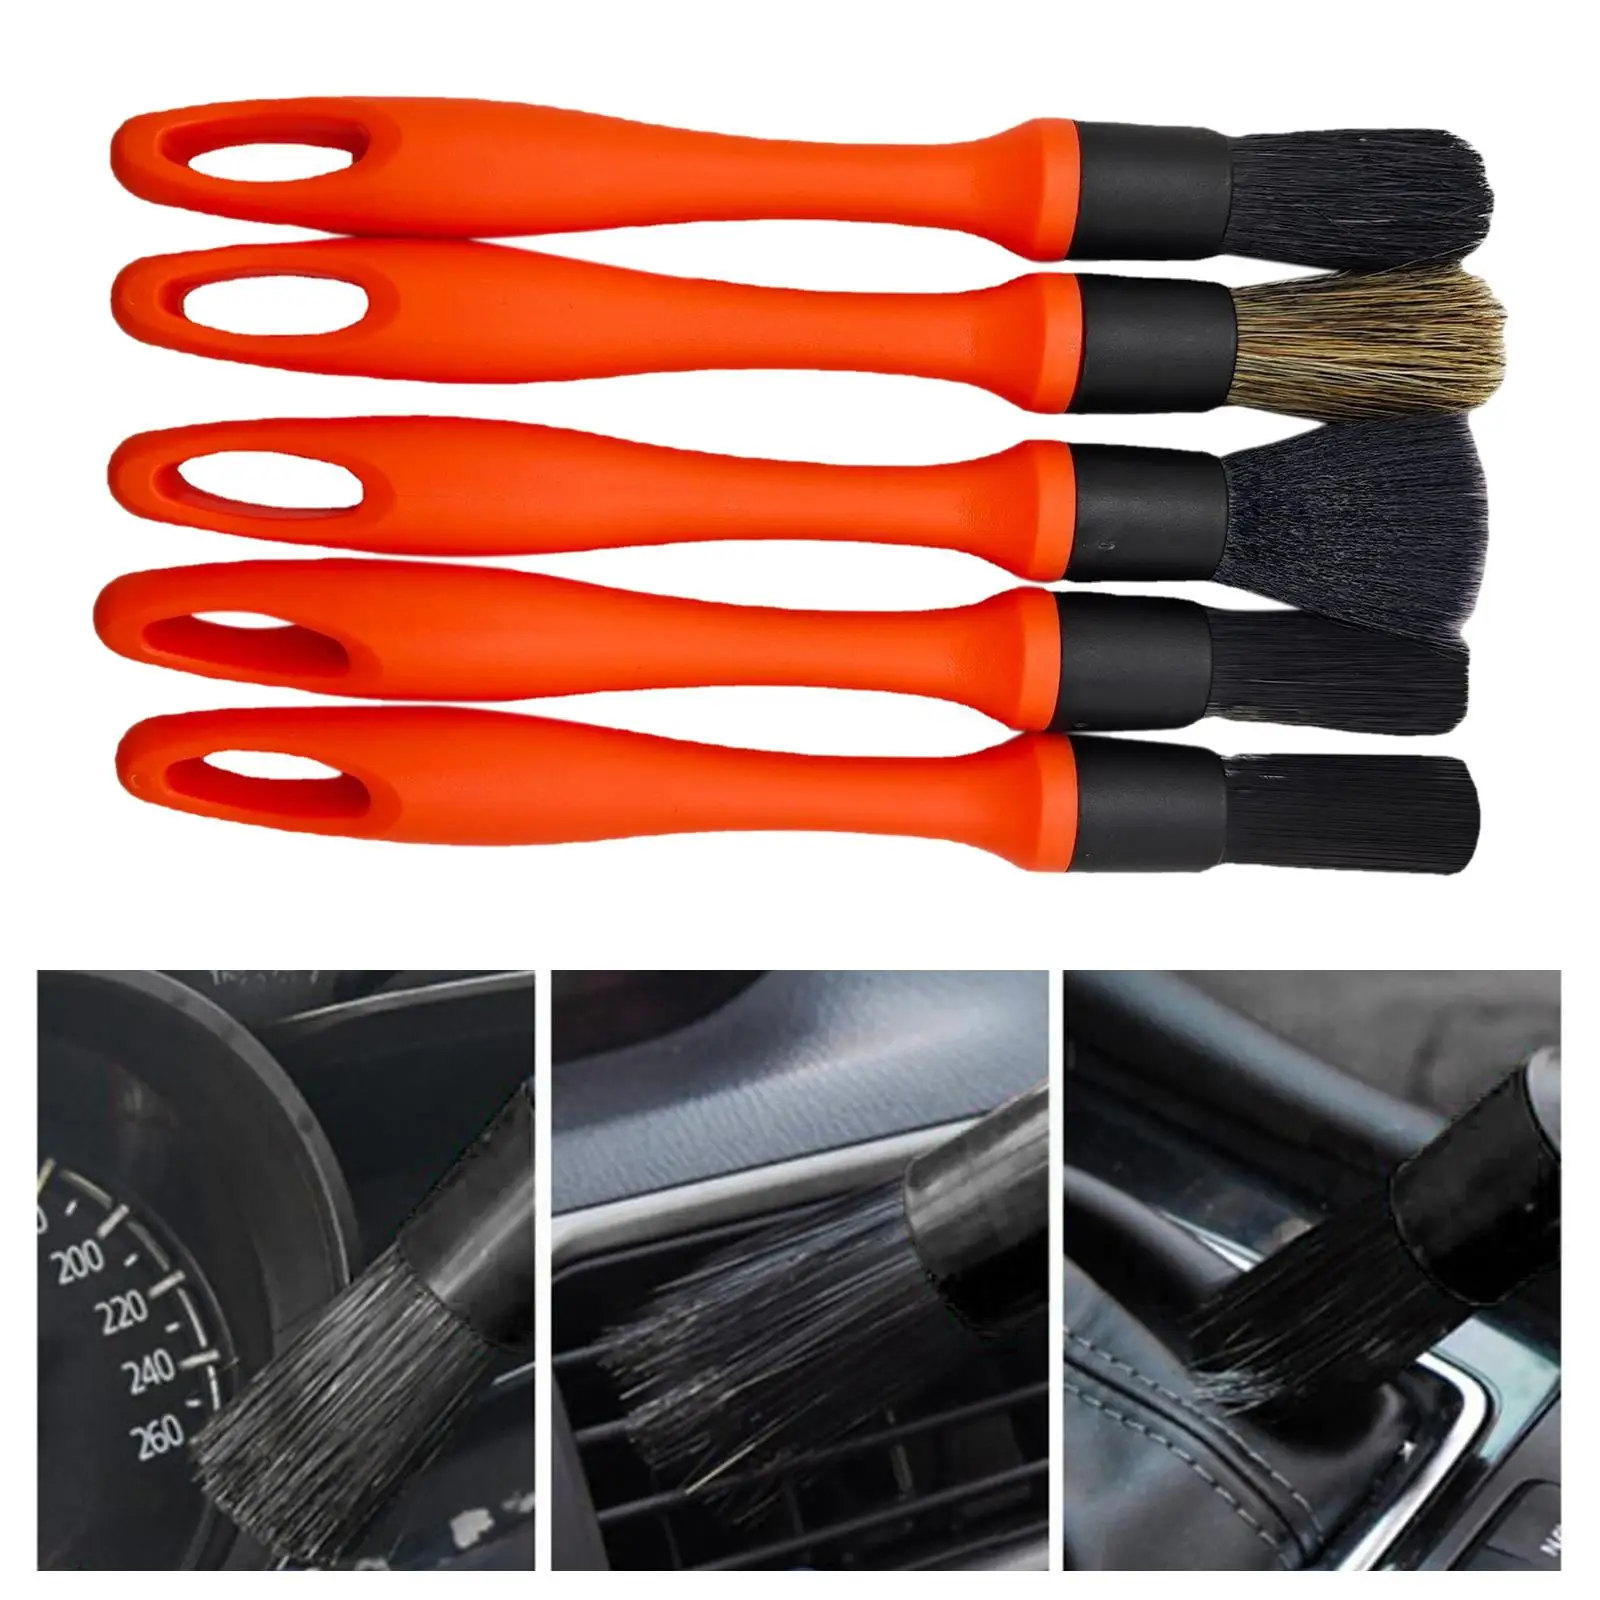 5x Car Interior Cleaning Brush Replaceable Detail Dust Brush for Wheel Cleaning Engine Console Exterior Vehicle Exterior